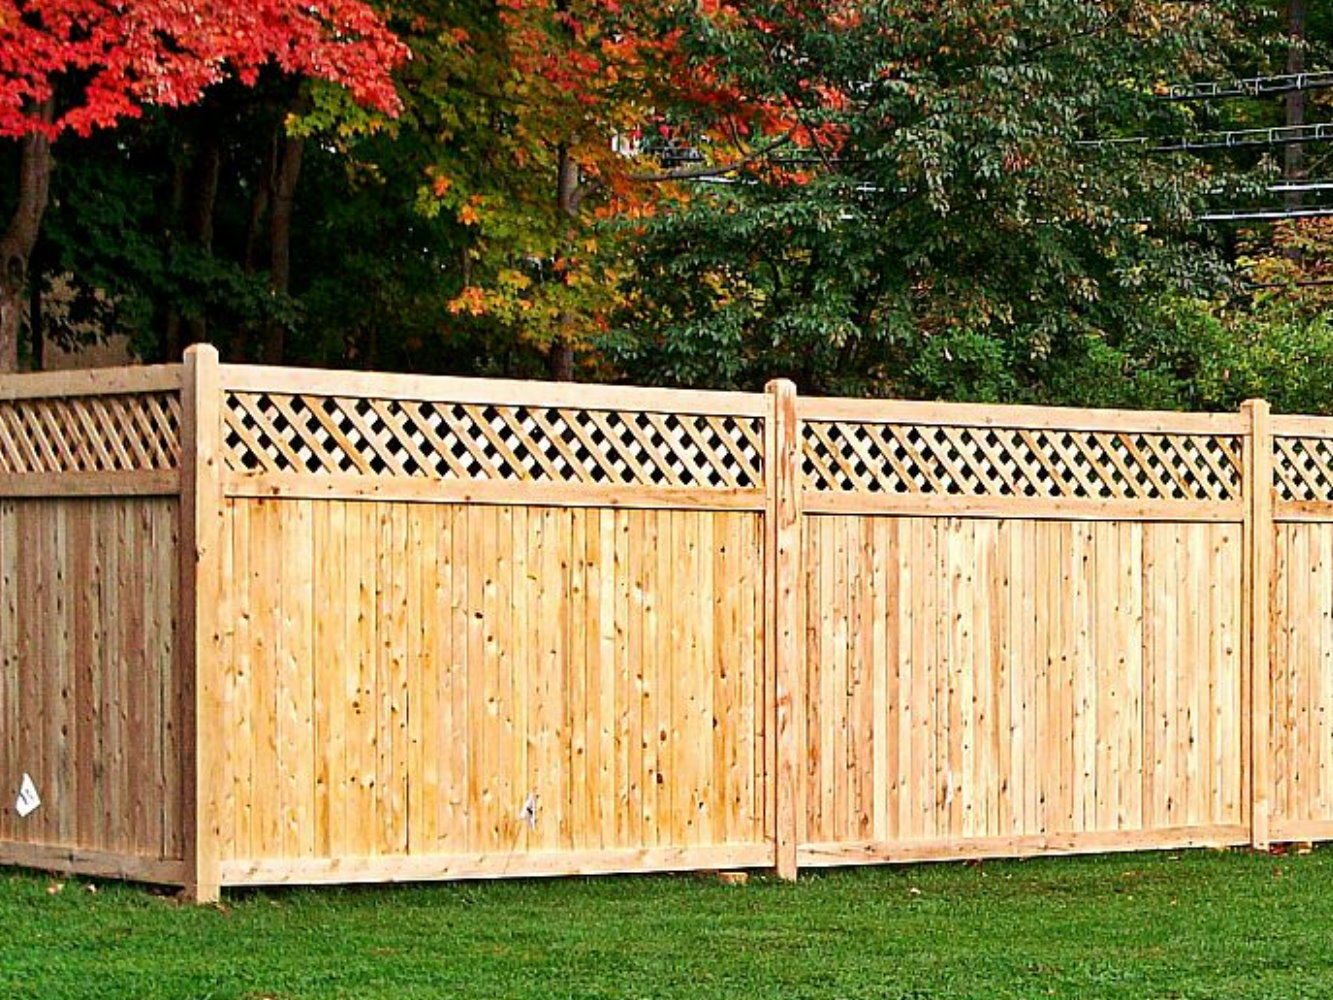 Mount Kisco New York residential fencing